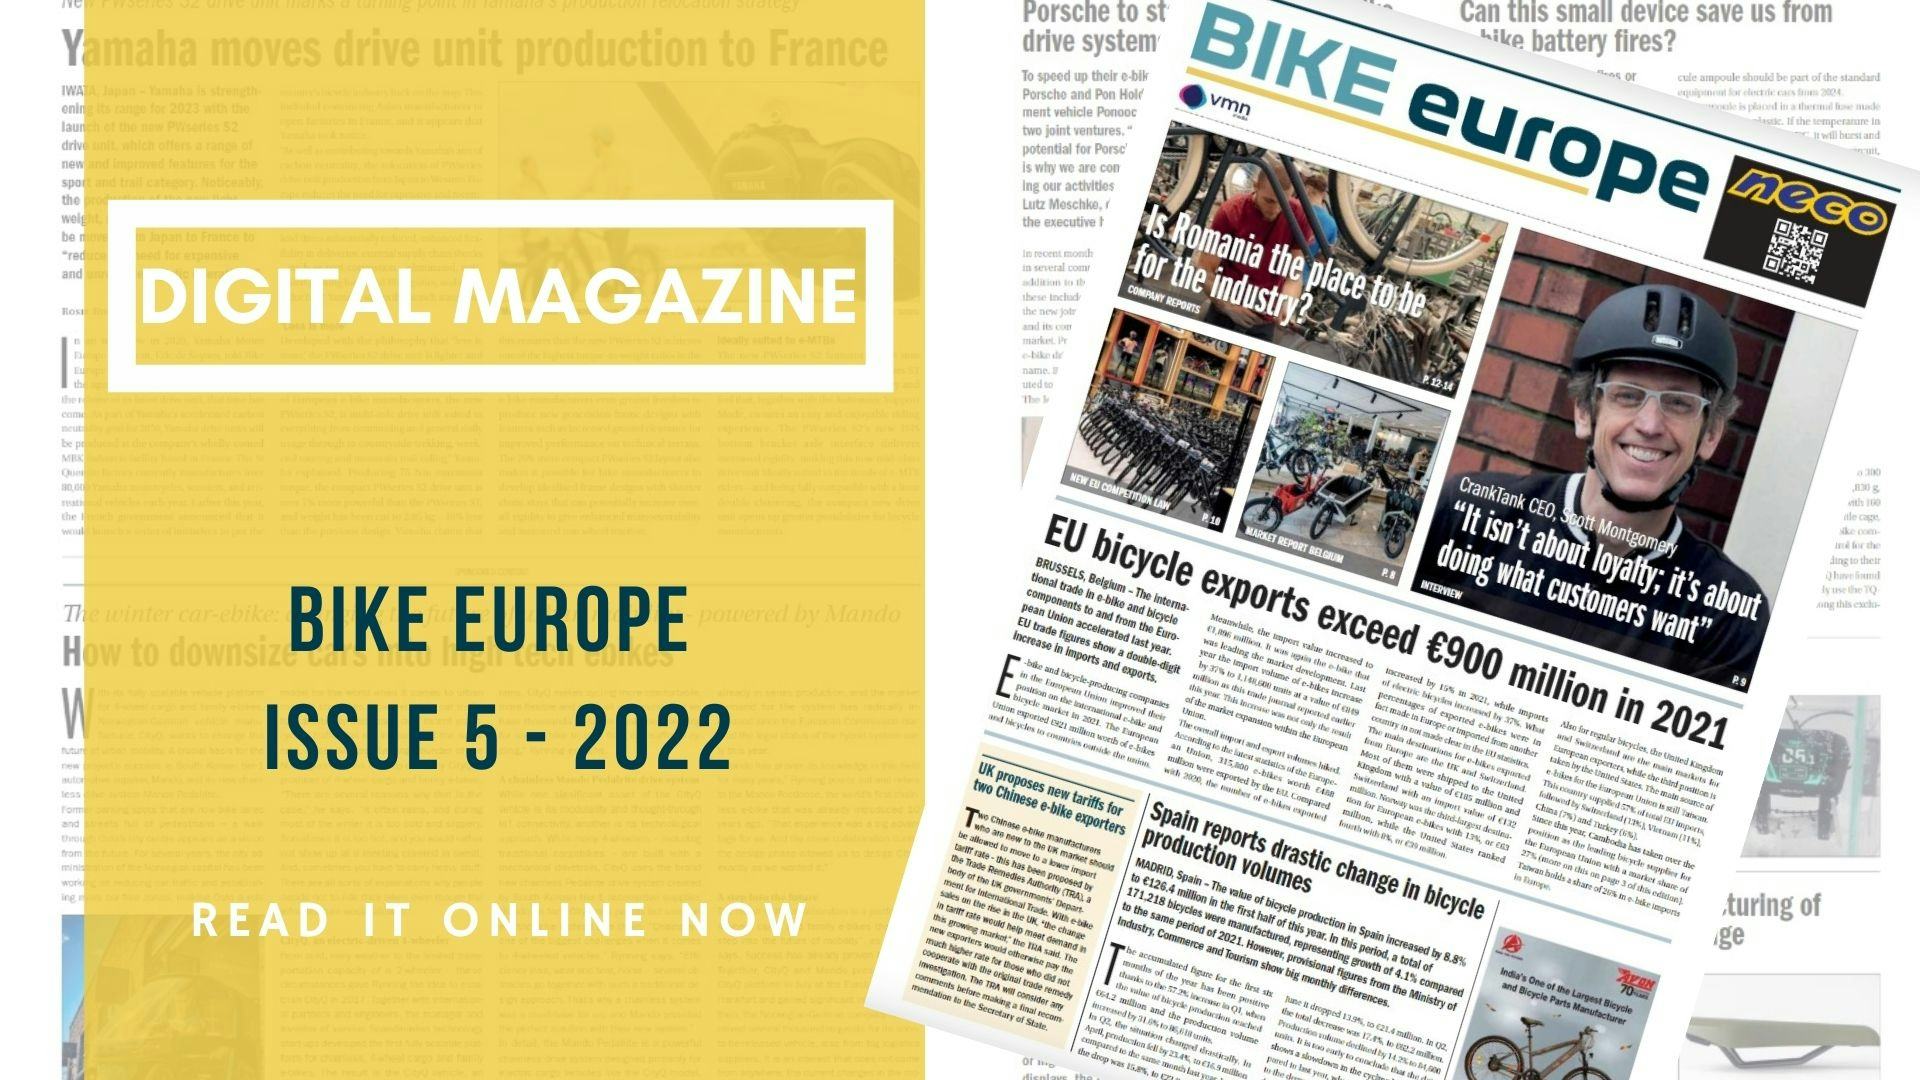 Bike Europe issue 5/2022 available online now